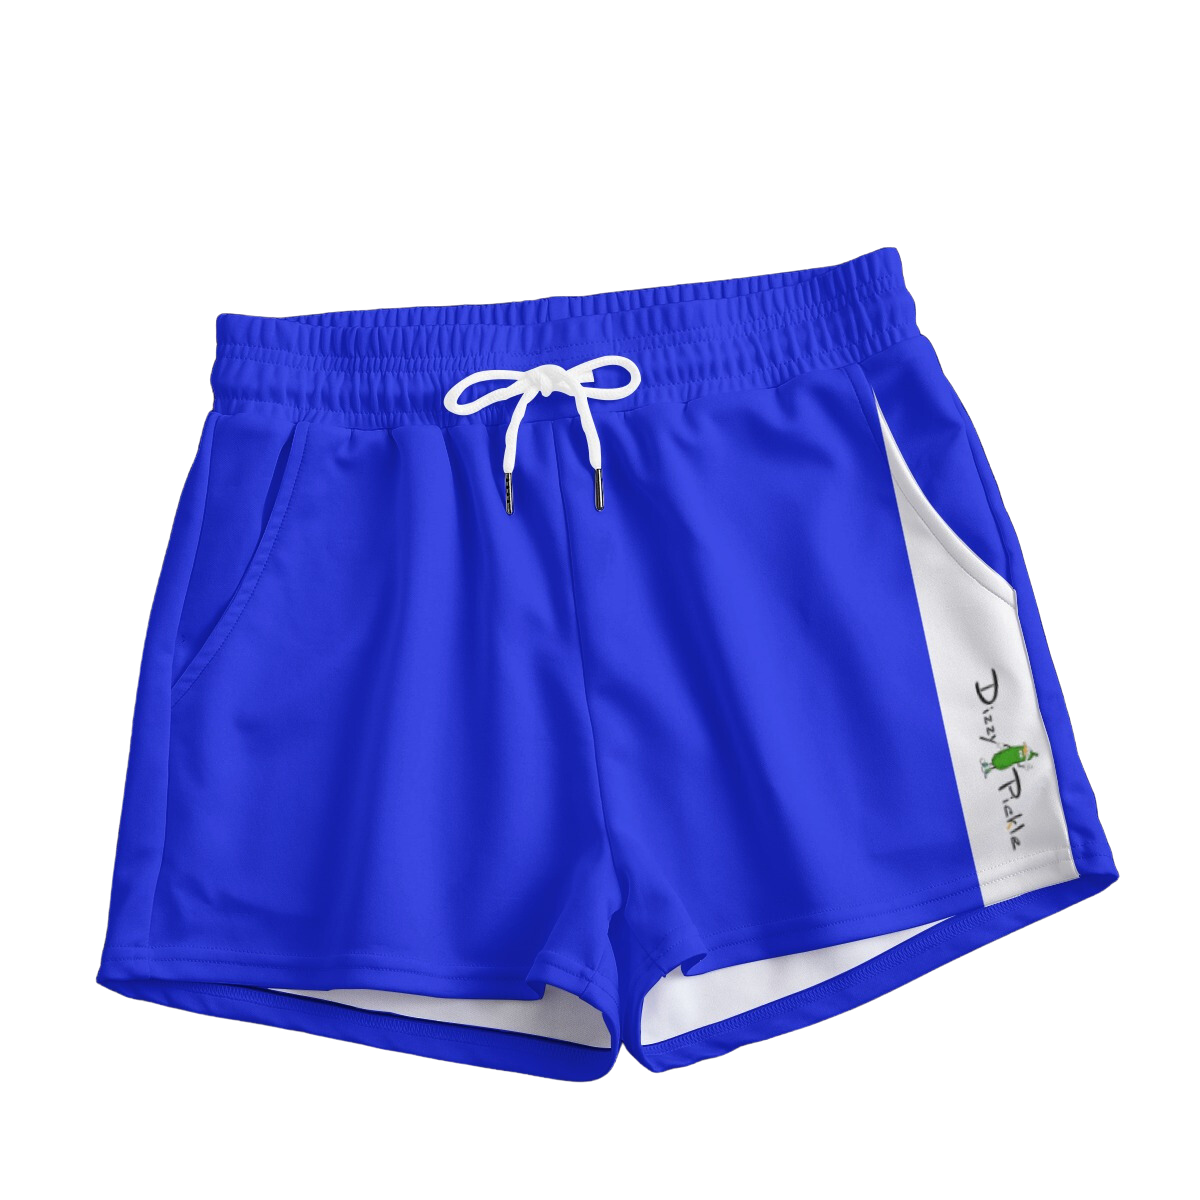 Dizzy Pickle DZY P Classic Women's Pickleball Casual Shorts with Pockets Cobalt